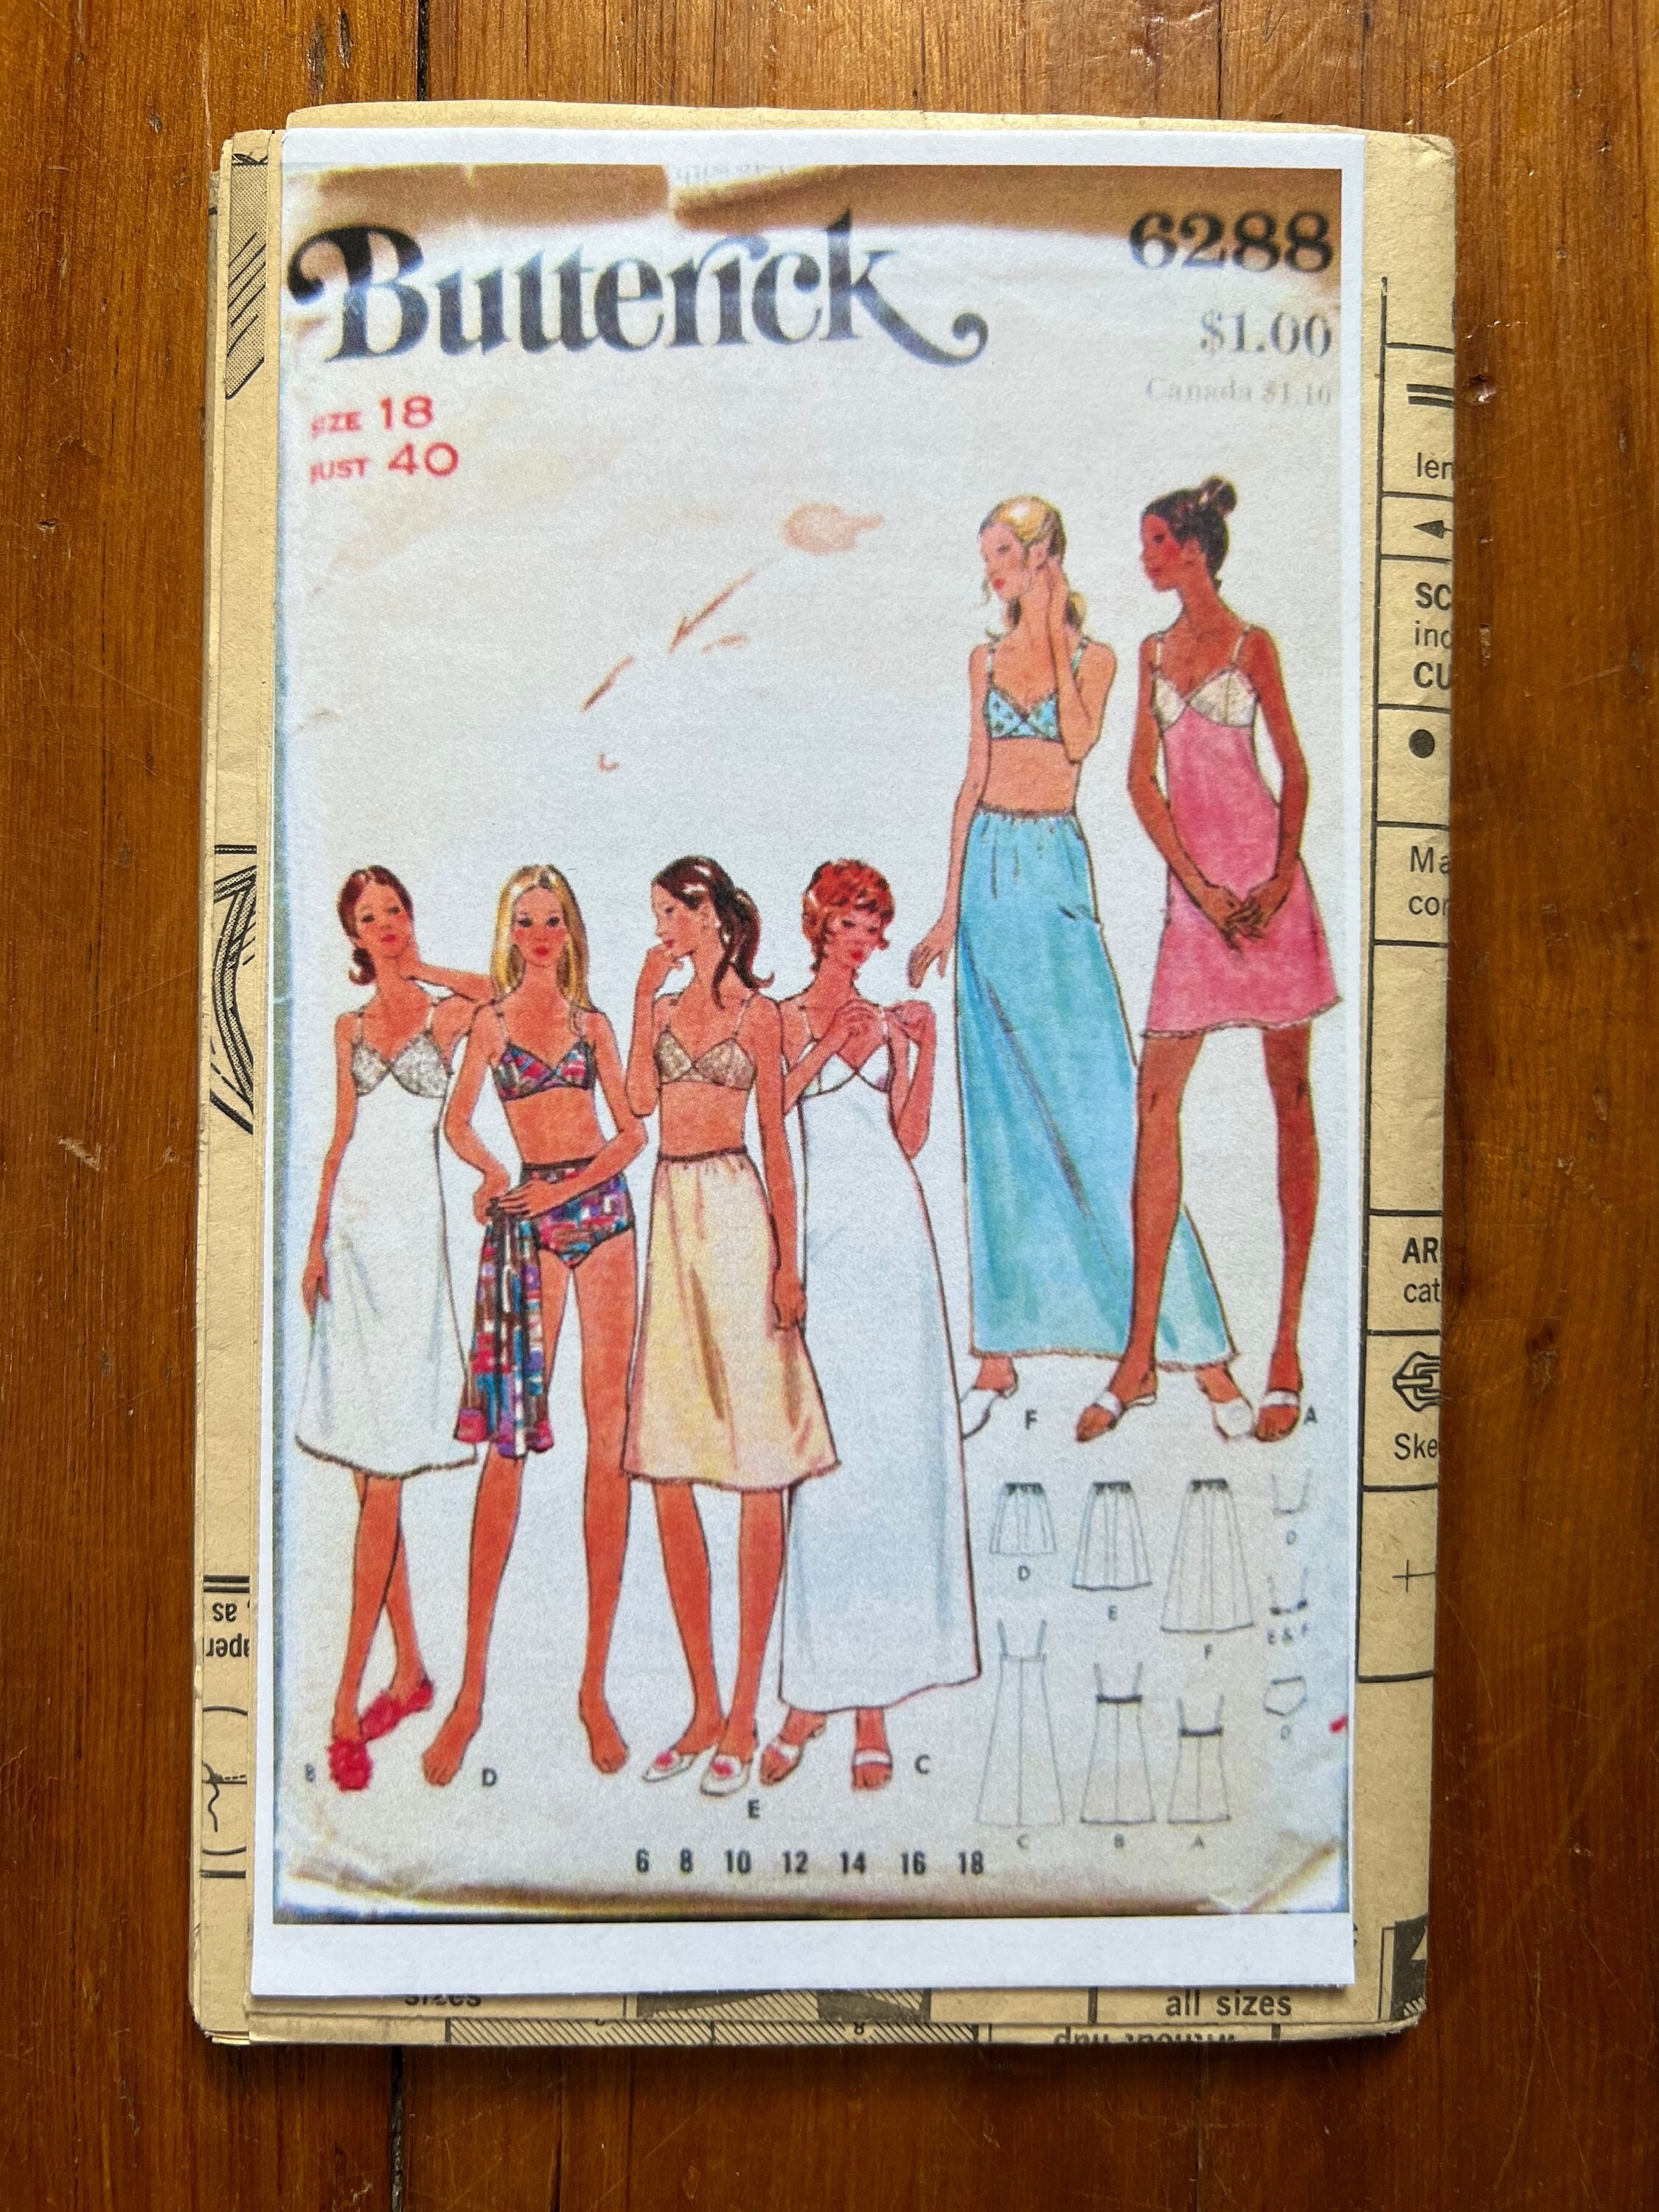 70s Lingerie Sewing Pattern / Vintage 1970s Bra, Panties & Night Gown /  Women's Size 18, Bust 40 / Butterick 6288 / no Packet -  New Zealand